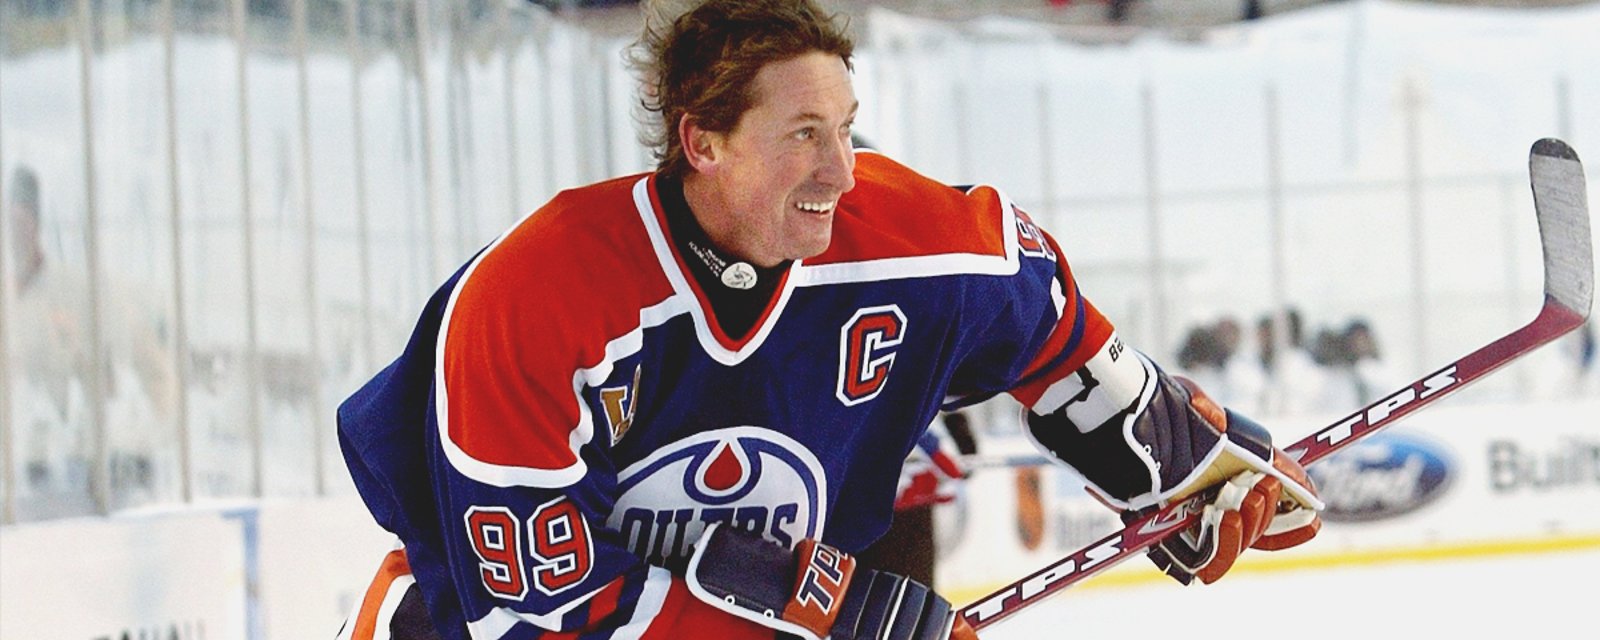 Wayne Gretzky had some advice to give to the Oilers after last night’s defeat.